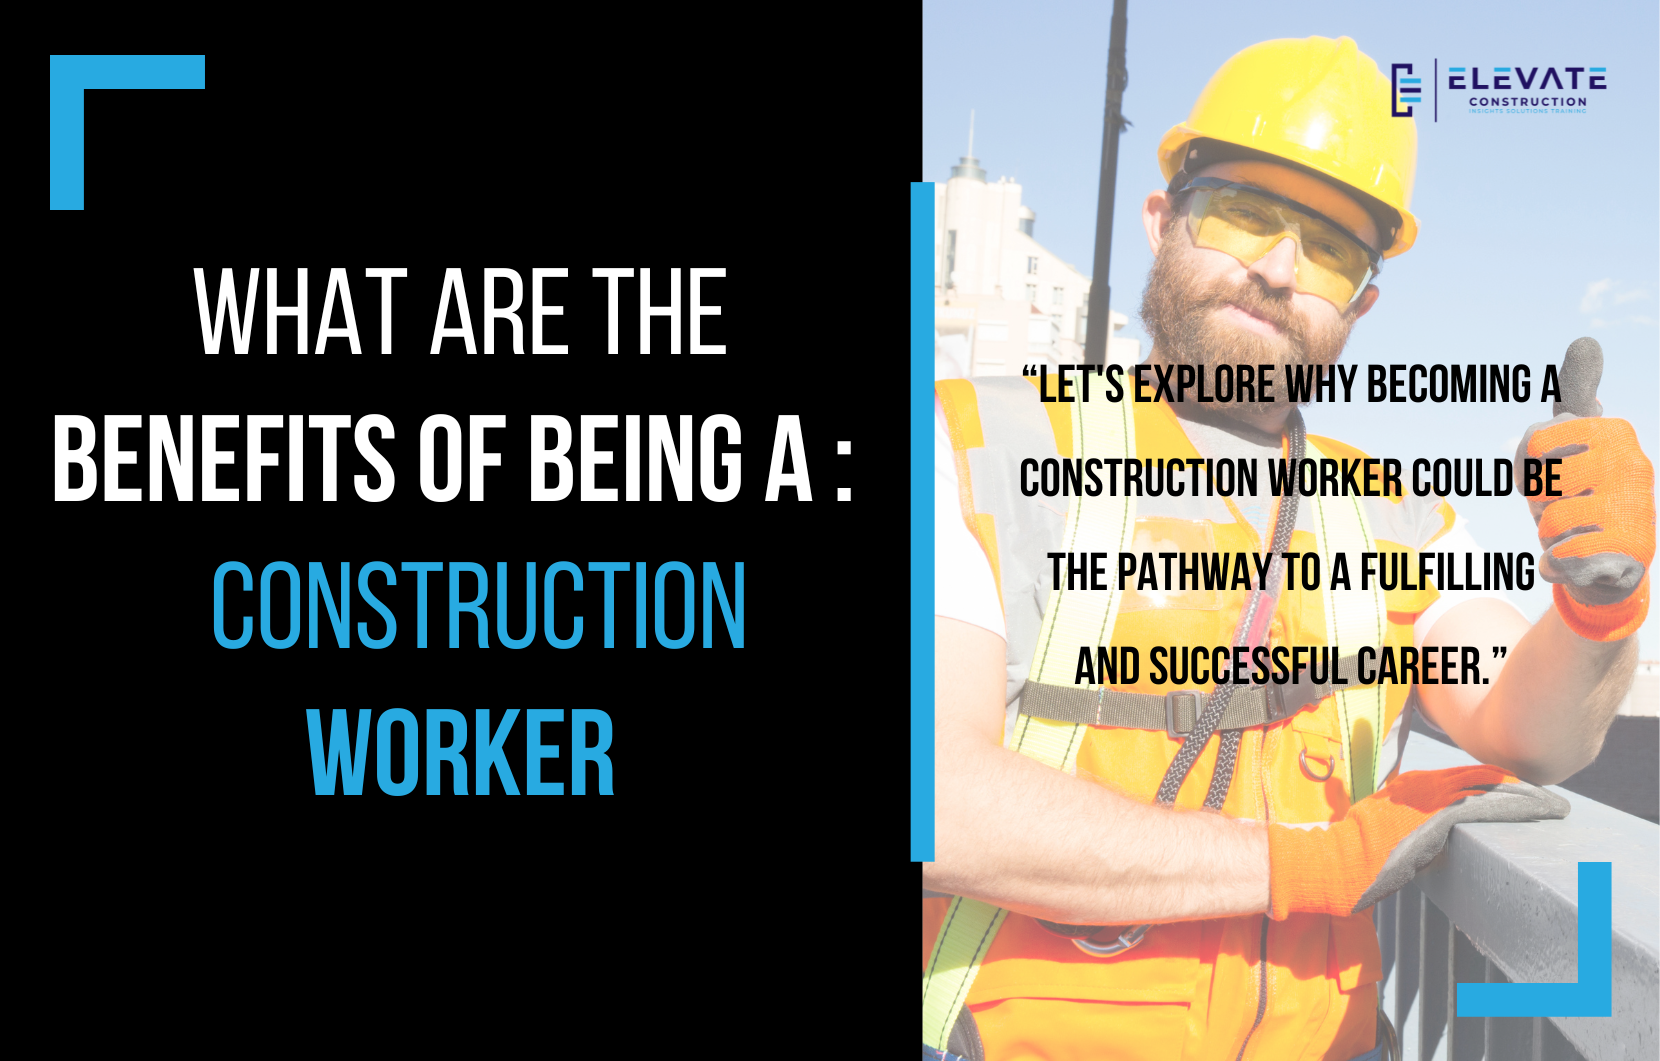 What Are The Benefits Of Being A Construction Worker?